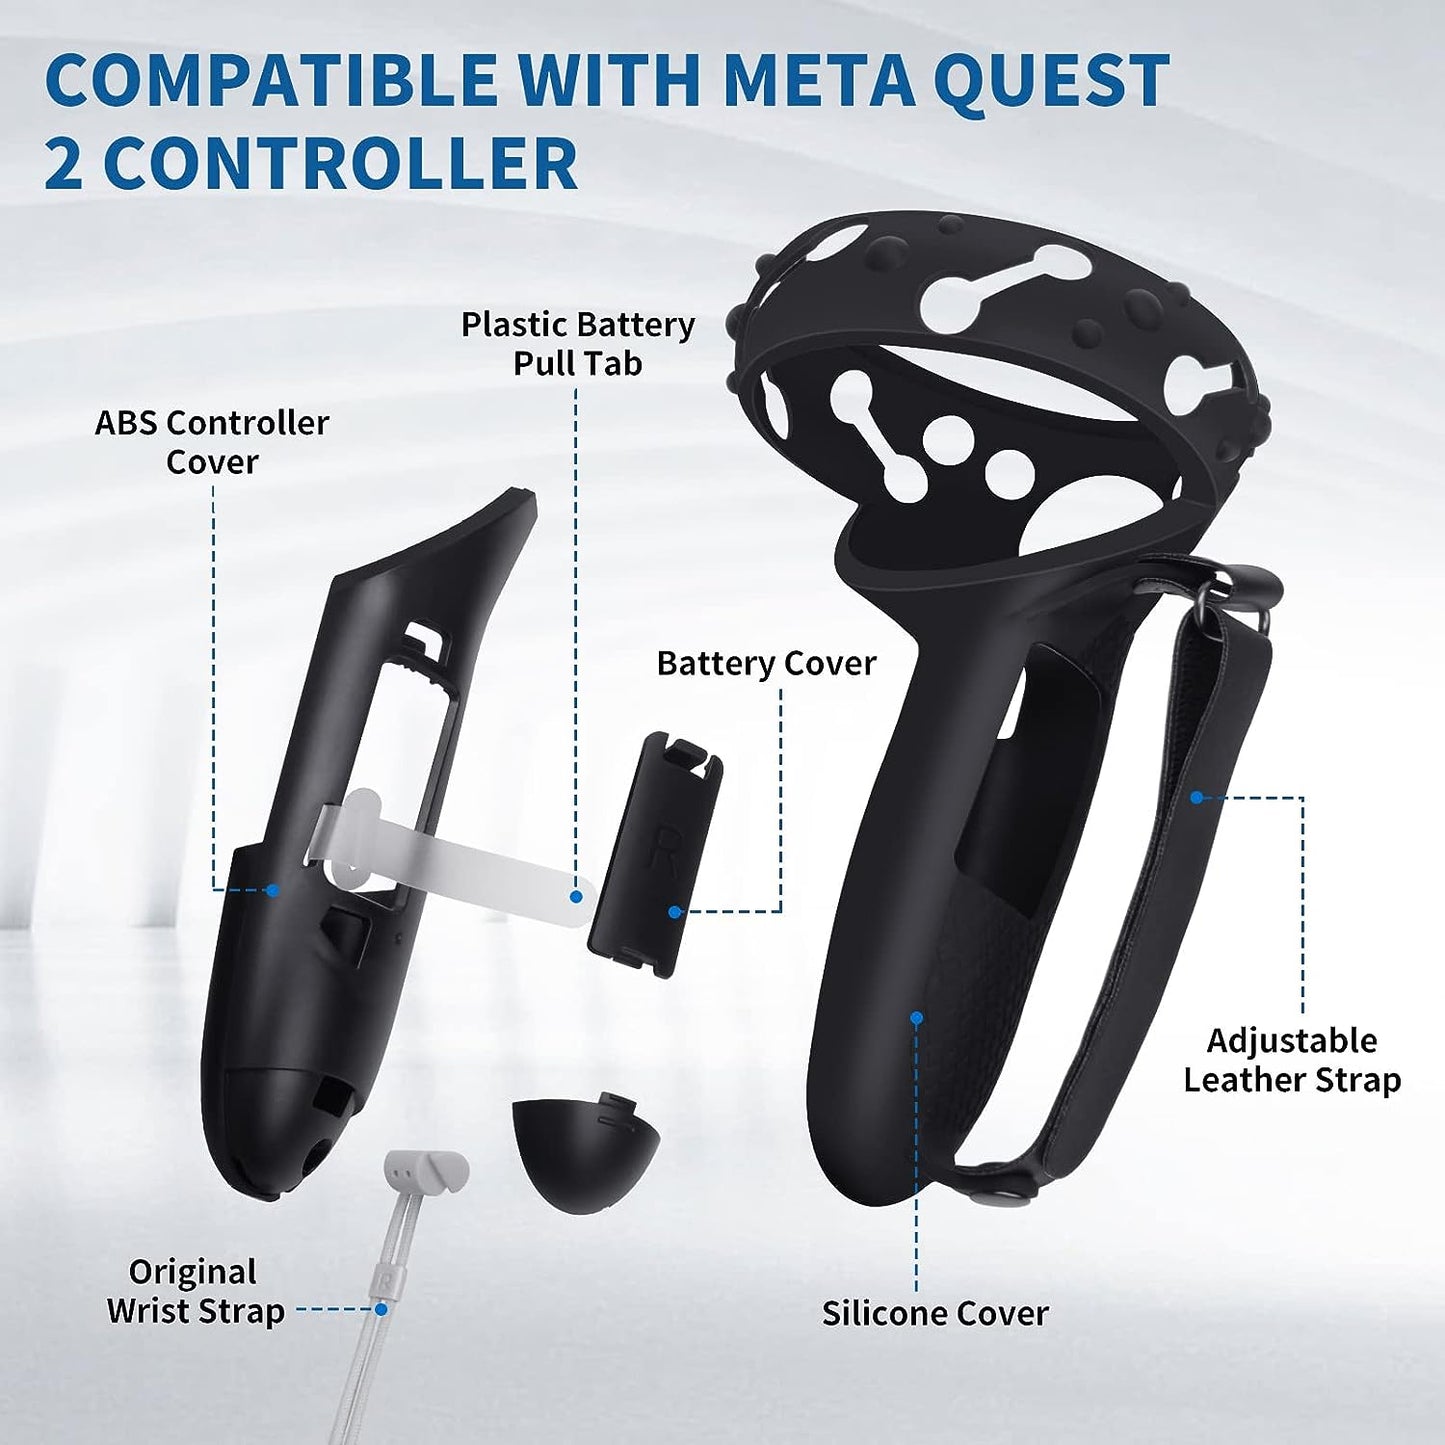 Enhanced Controller Grips Cover for Oculus Quest 2 with Anti-Throw Strap, Battery Opening, and Extended Design for Large Hands - Black